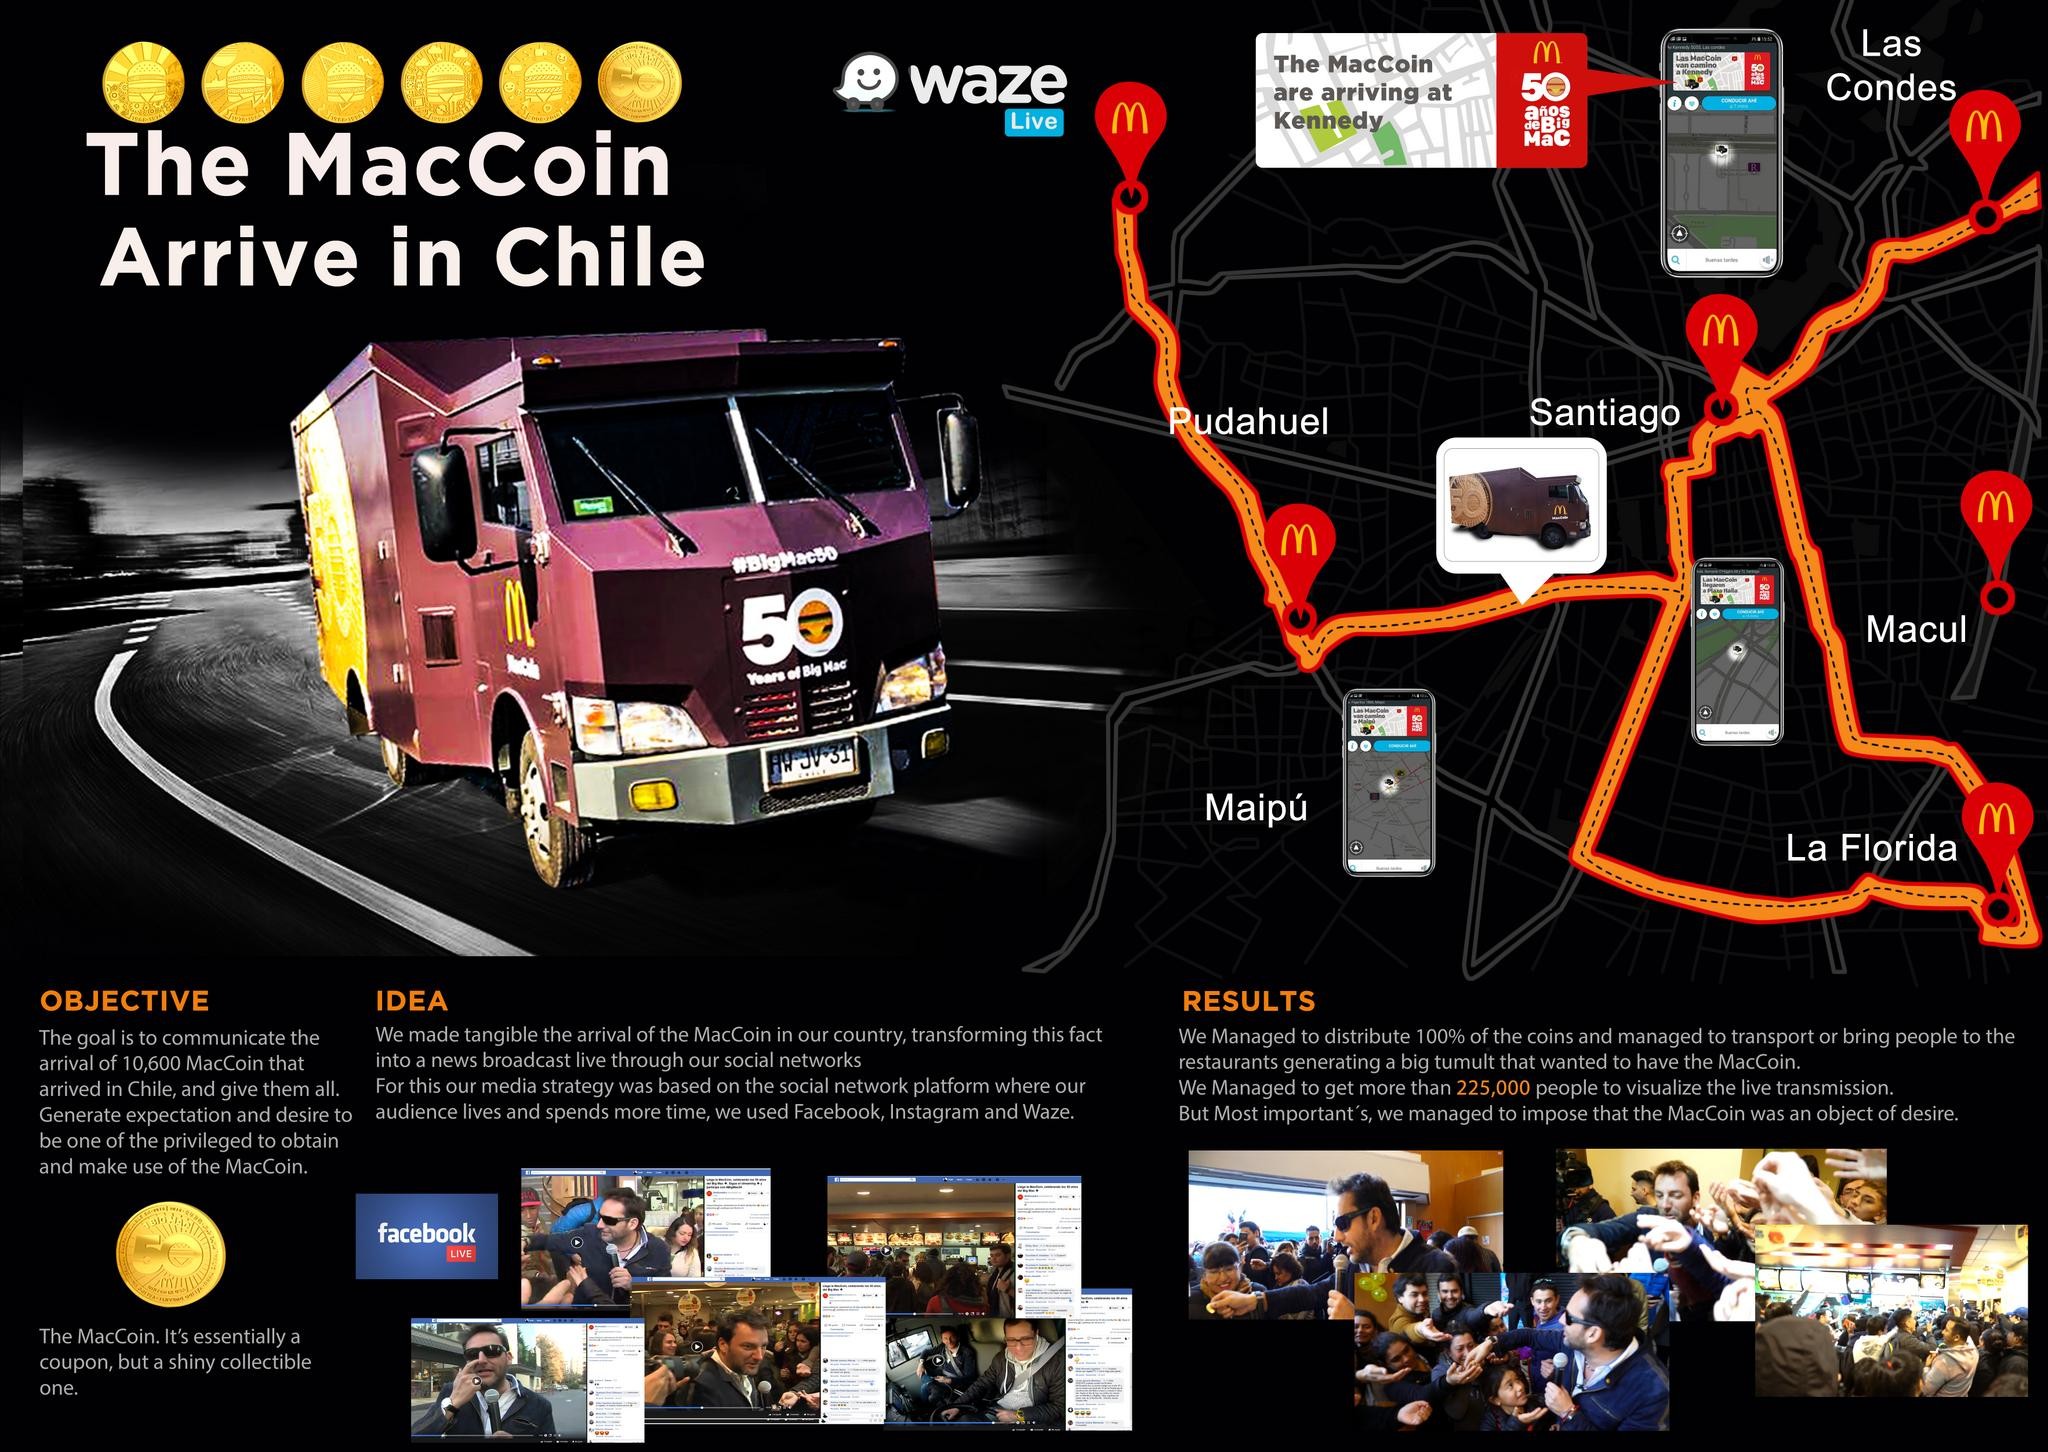 The MacCoin arrived in Chile